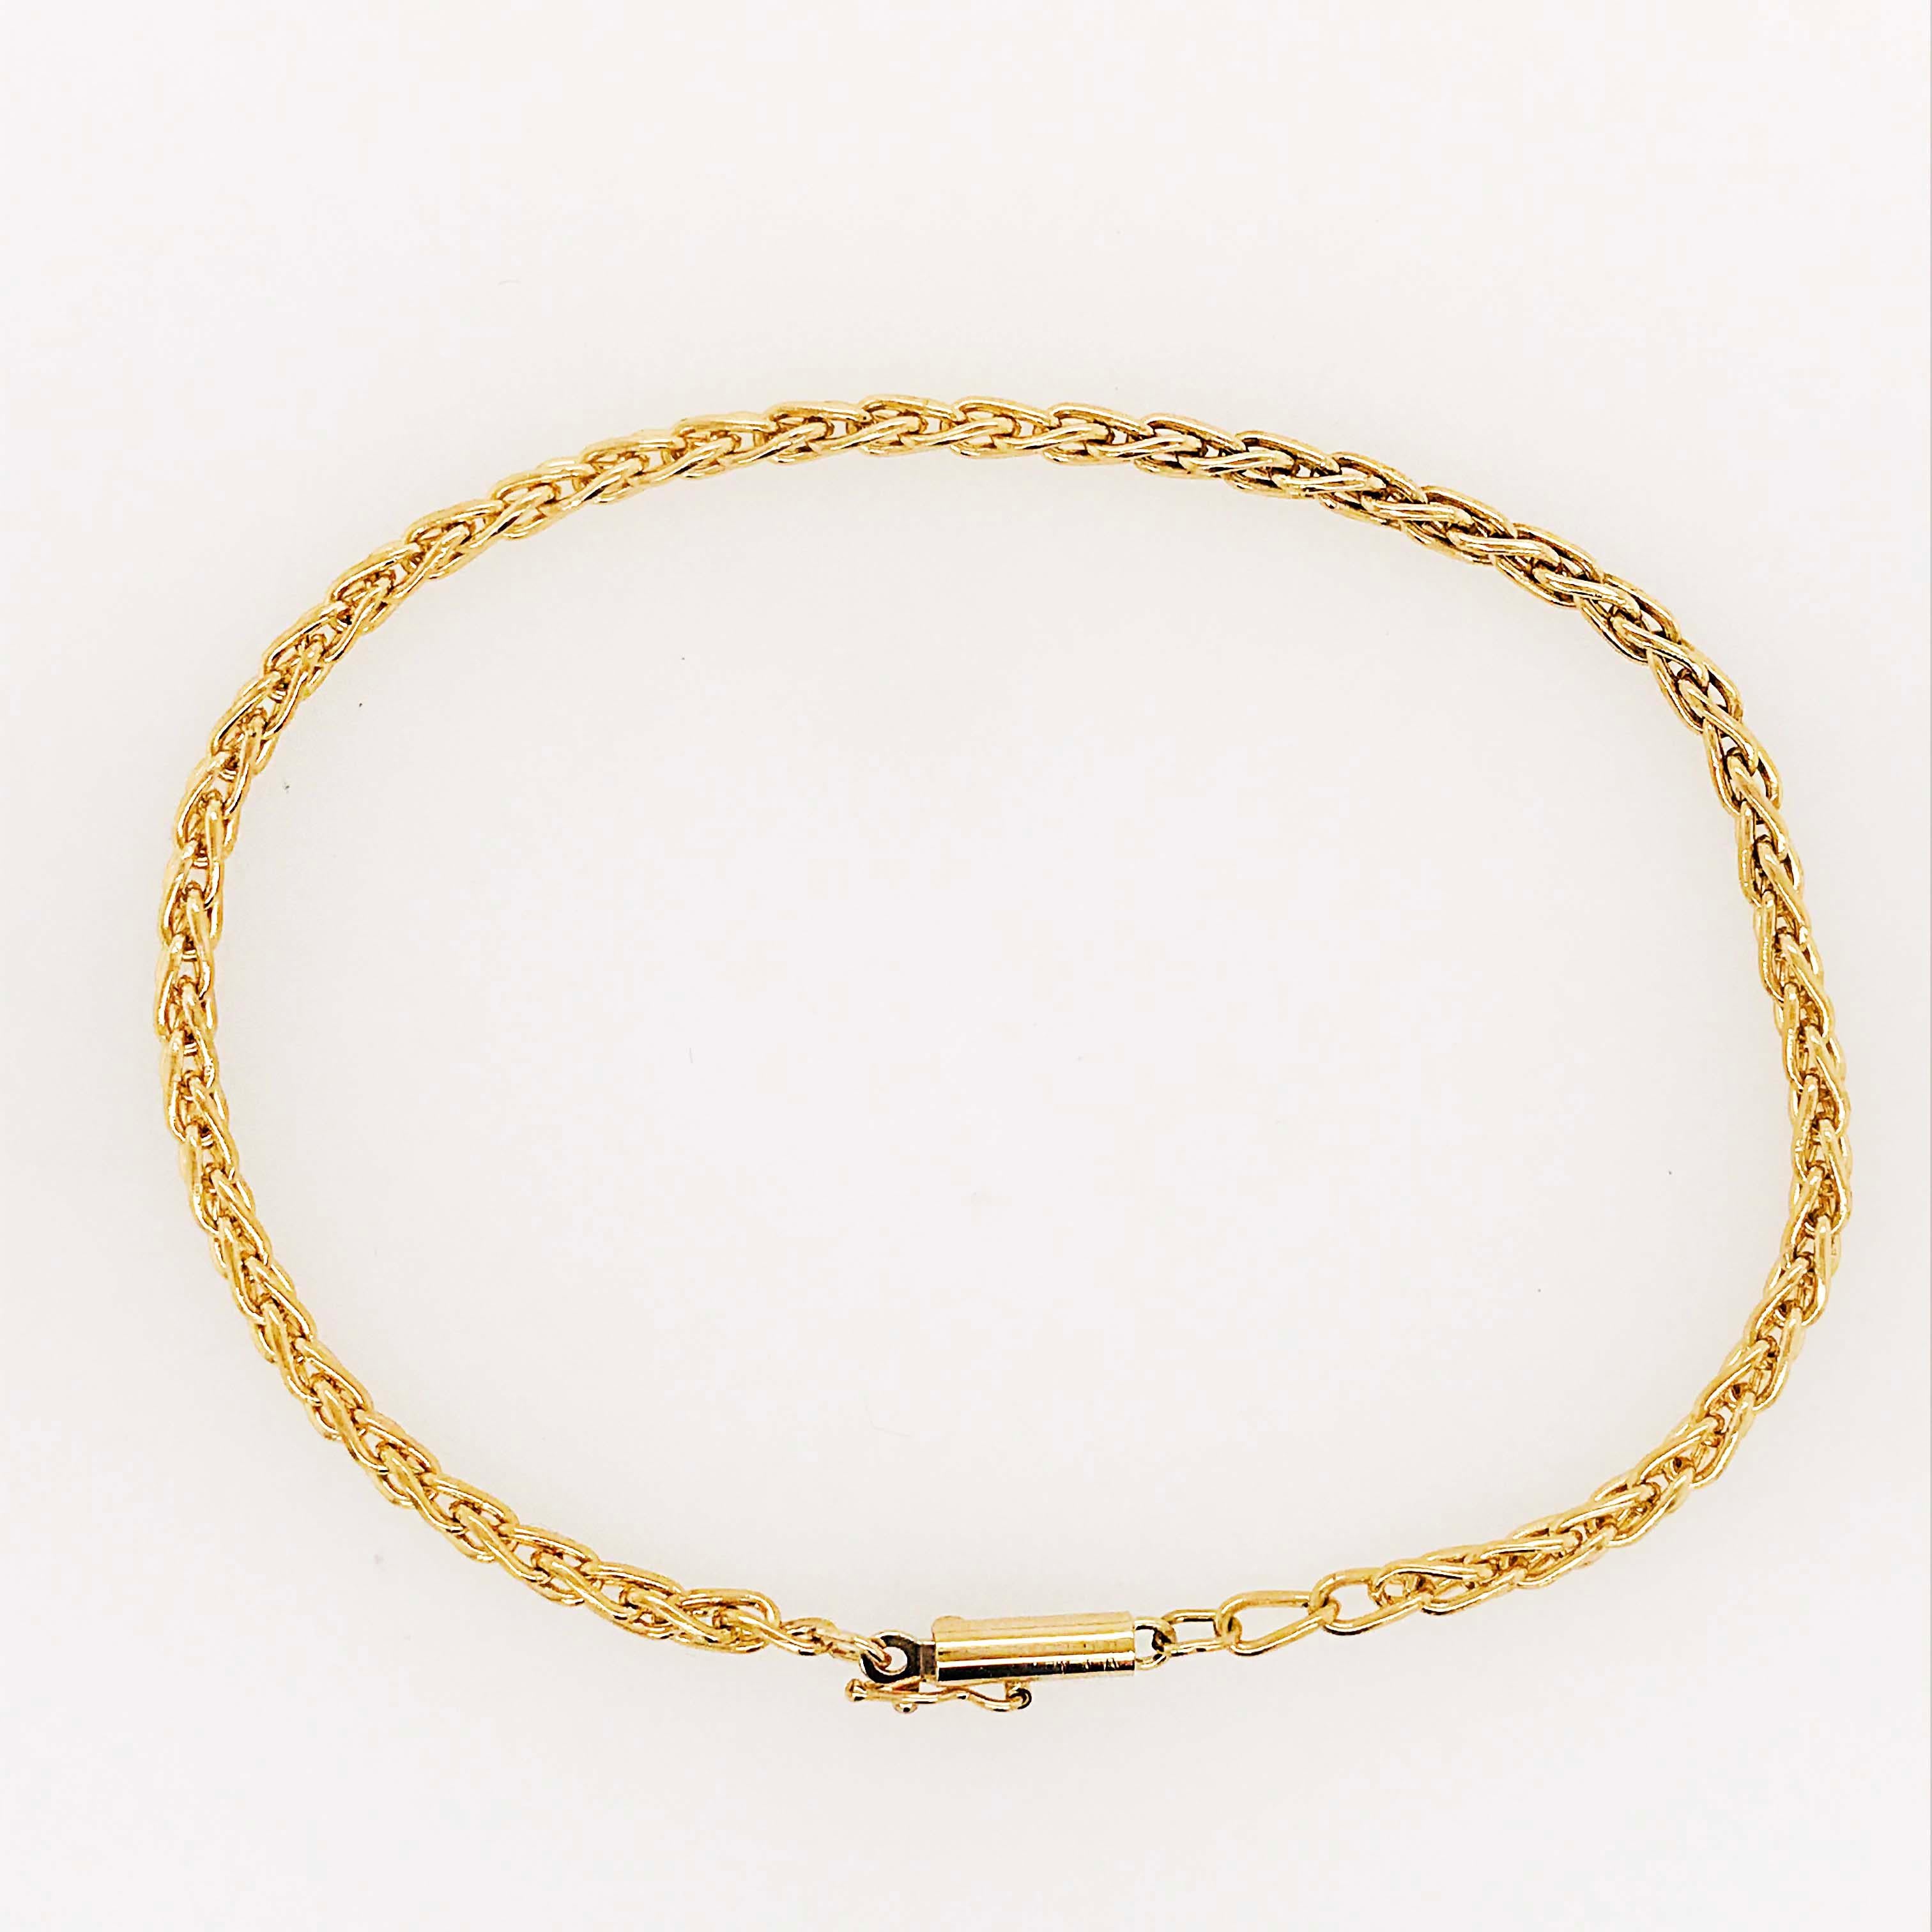 The 14 karat yellow gold bracelet has a heavy wheat design that is beautiful alone or paired with other bracelets. It has a beautiful barrel clasp and safety latch constructed out of 14k solid gold.   Your wrist will be a little happier with this